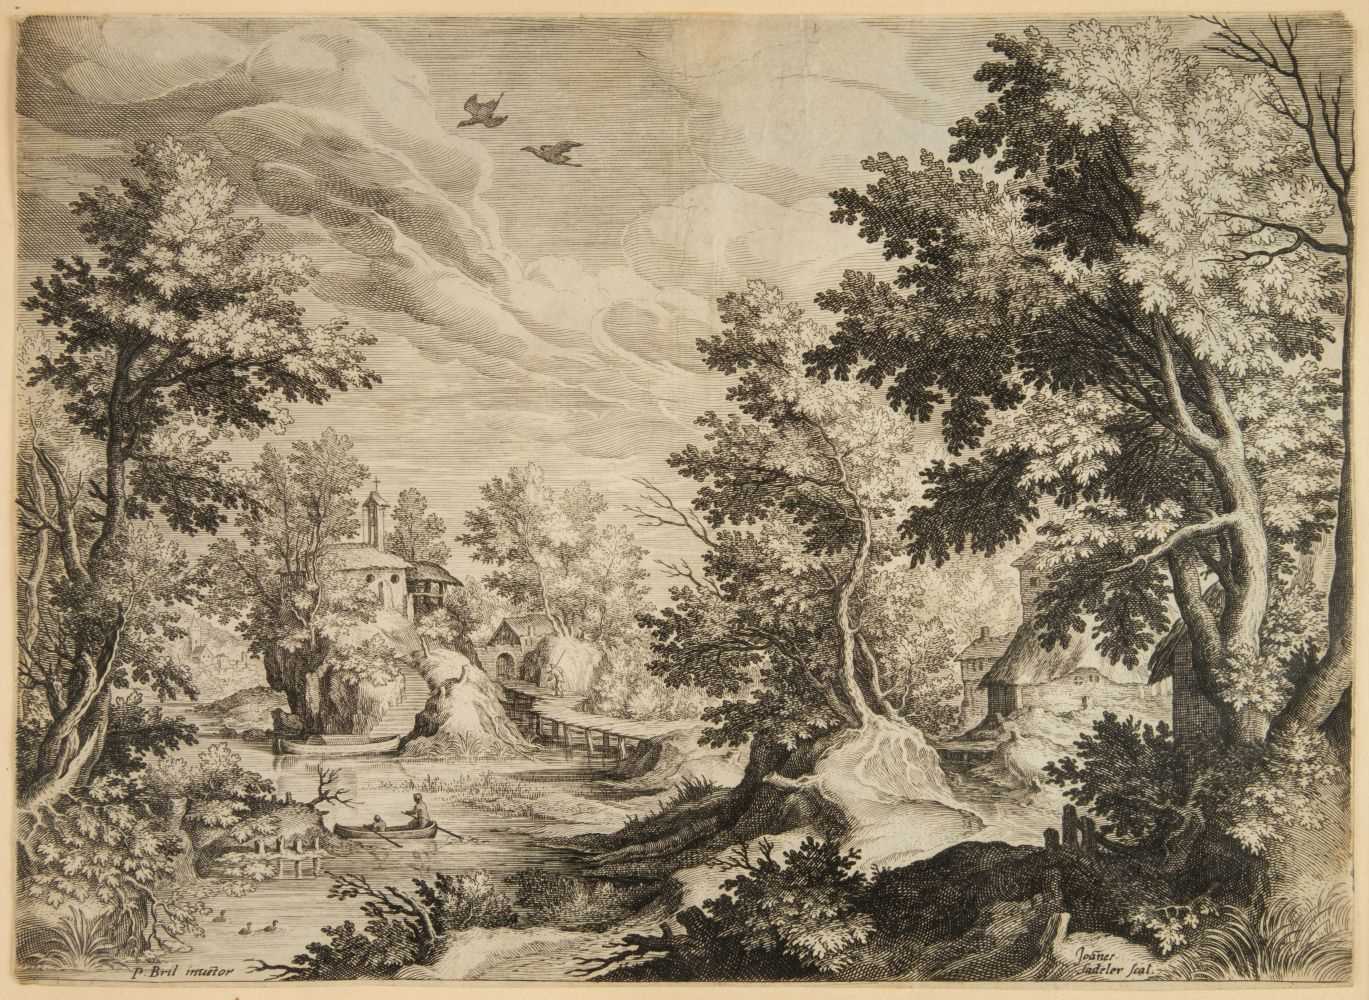 Lot 396 - Paul Bril (c.1553/54-1626). Five landscapes, early 17th century